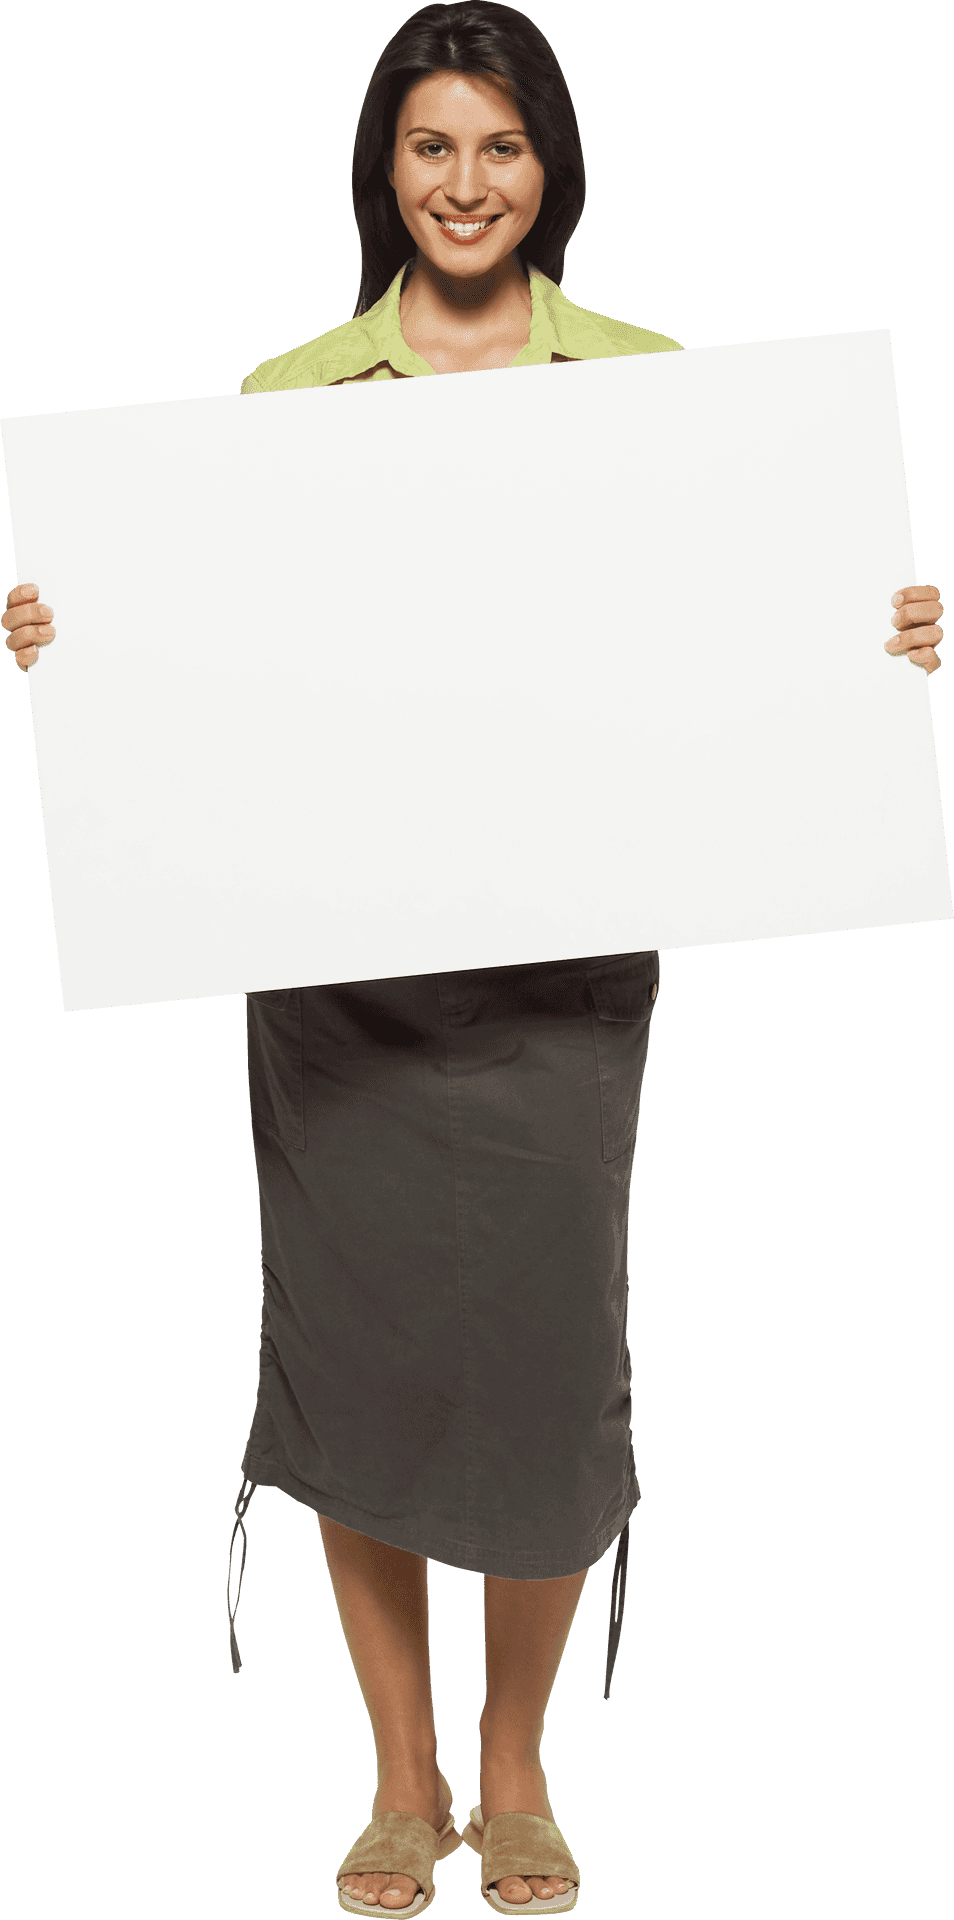 Woman Holding Blank Sign PNG image